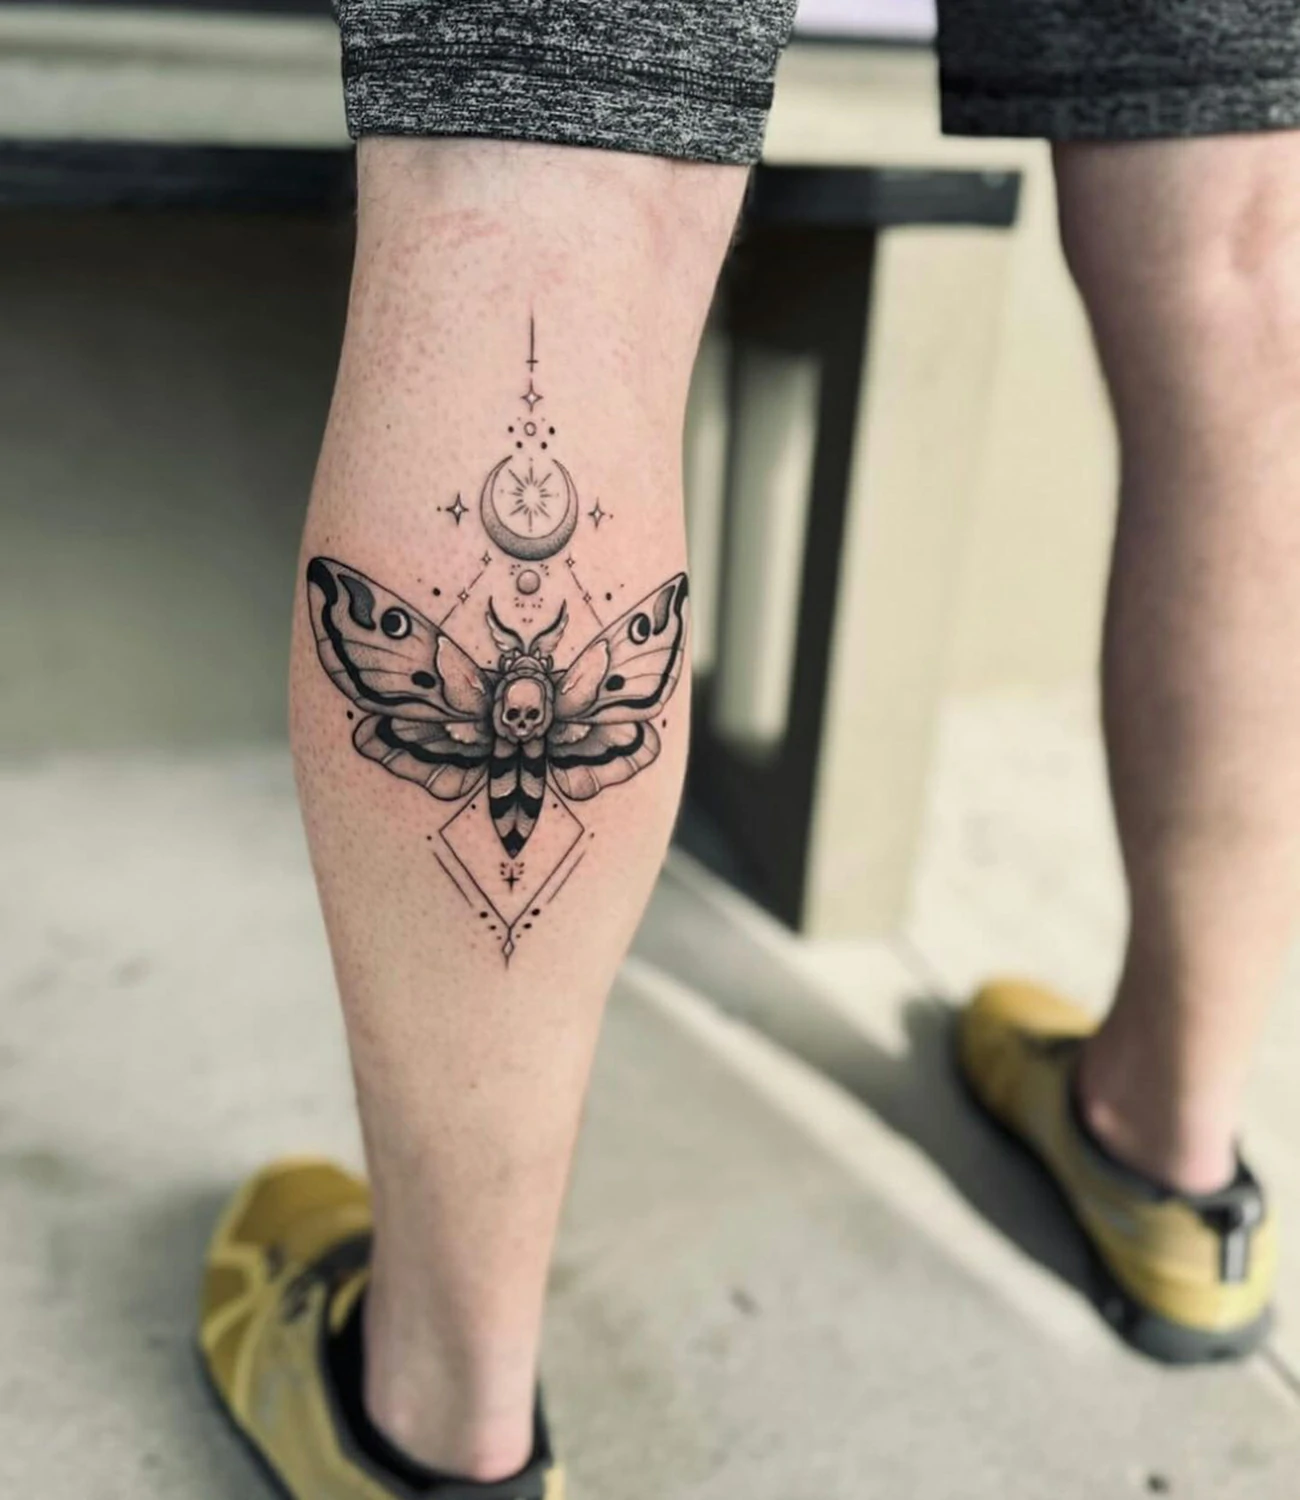 Geometric Death Moth Tattoo: Geometric death moth tattoos combine the eerie image of a death moth with geometric shapes, symbolizing transformation and mortality.